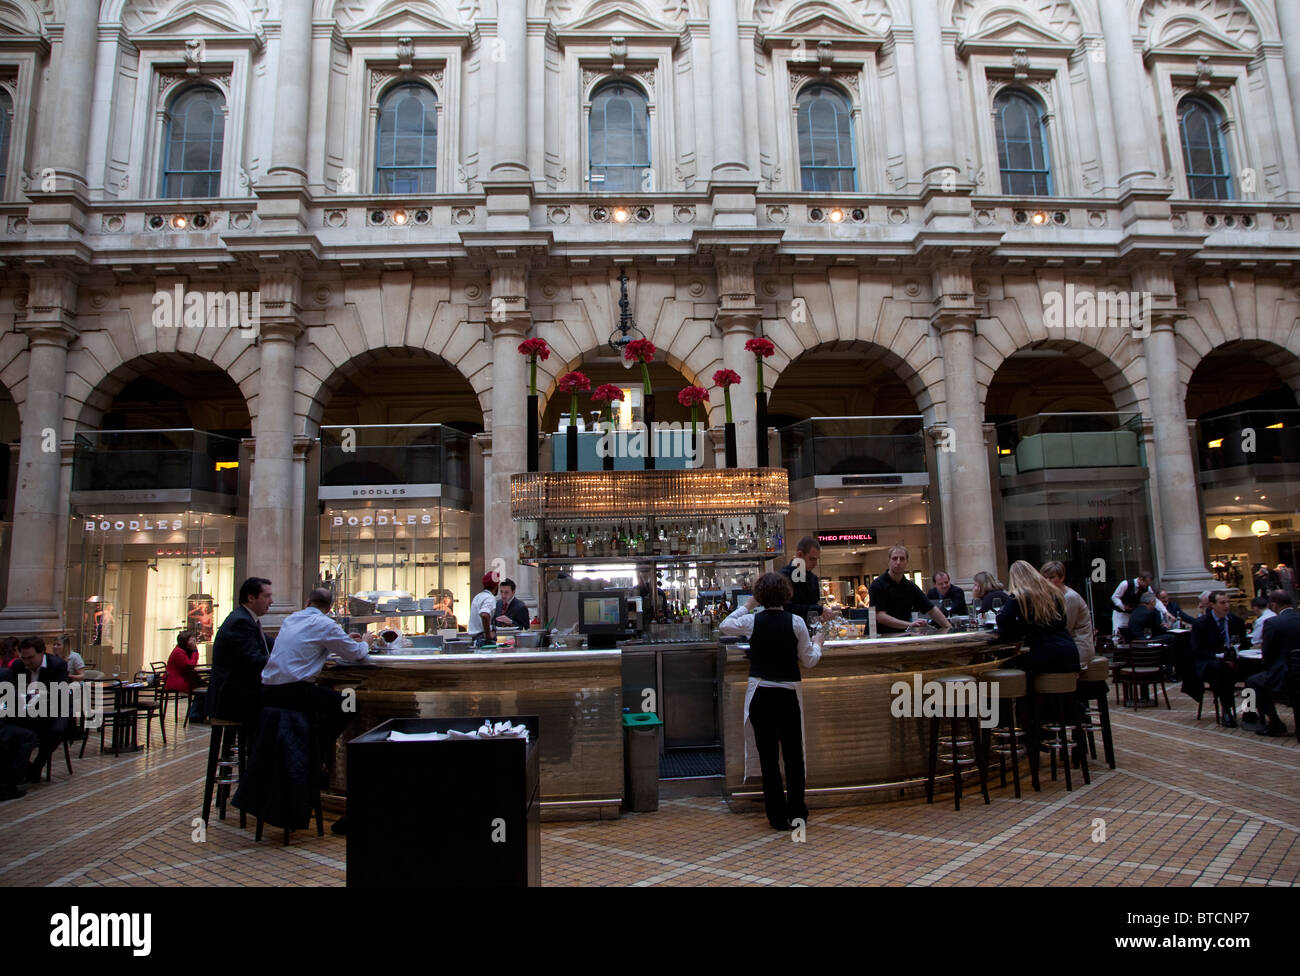 Bar and restaurant in Royal Exchange, Cornhill, City of London Stock Photo